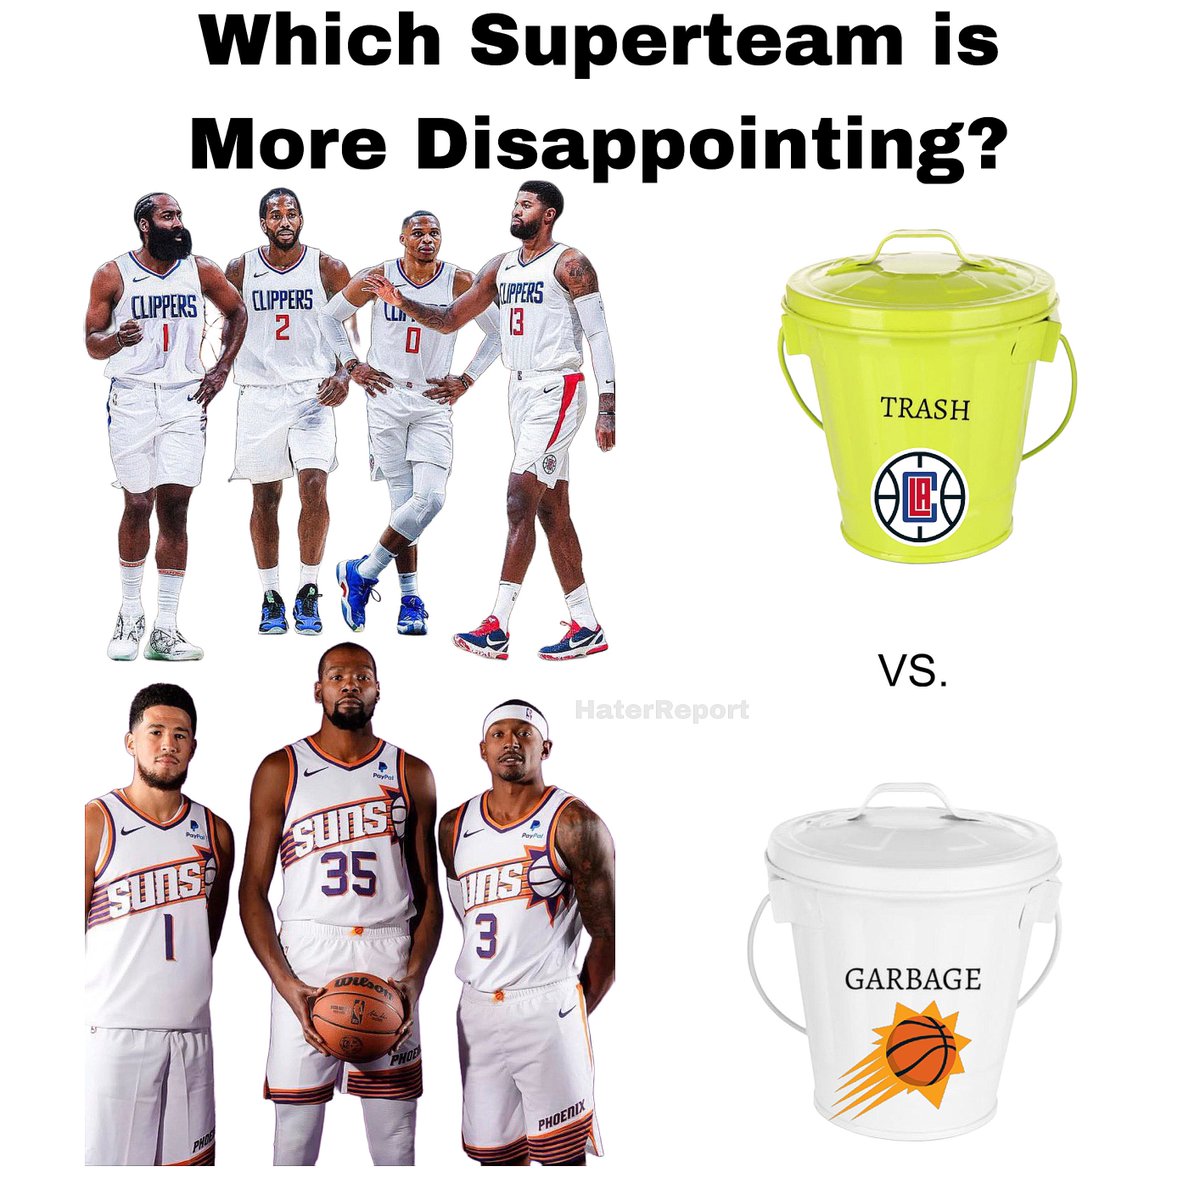 Based on your expectations, which “superteam” is worse. The Clippers or the Suns?